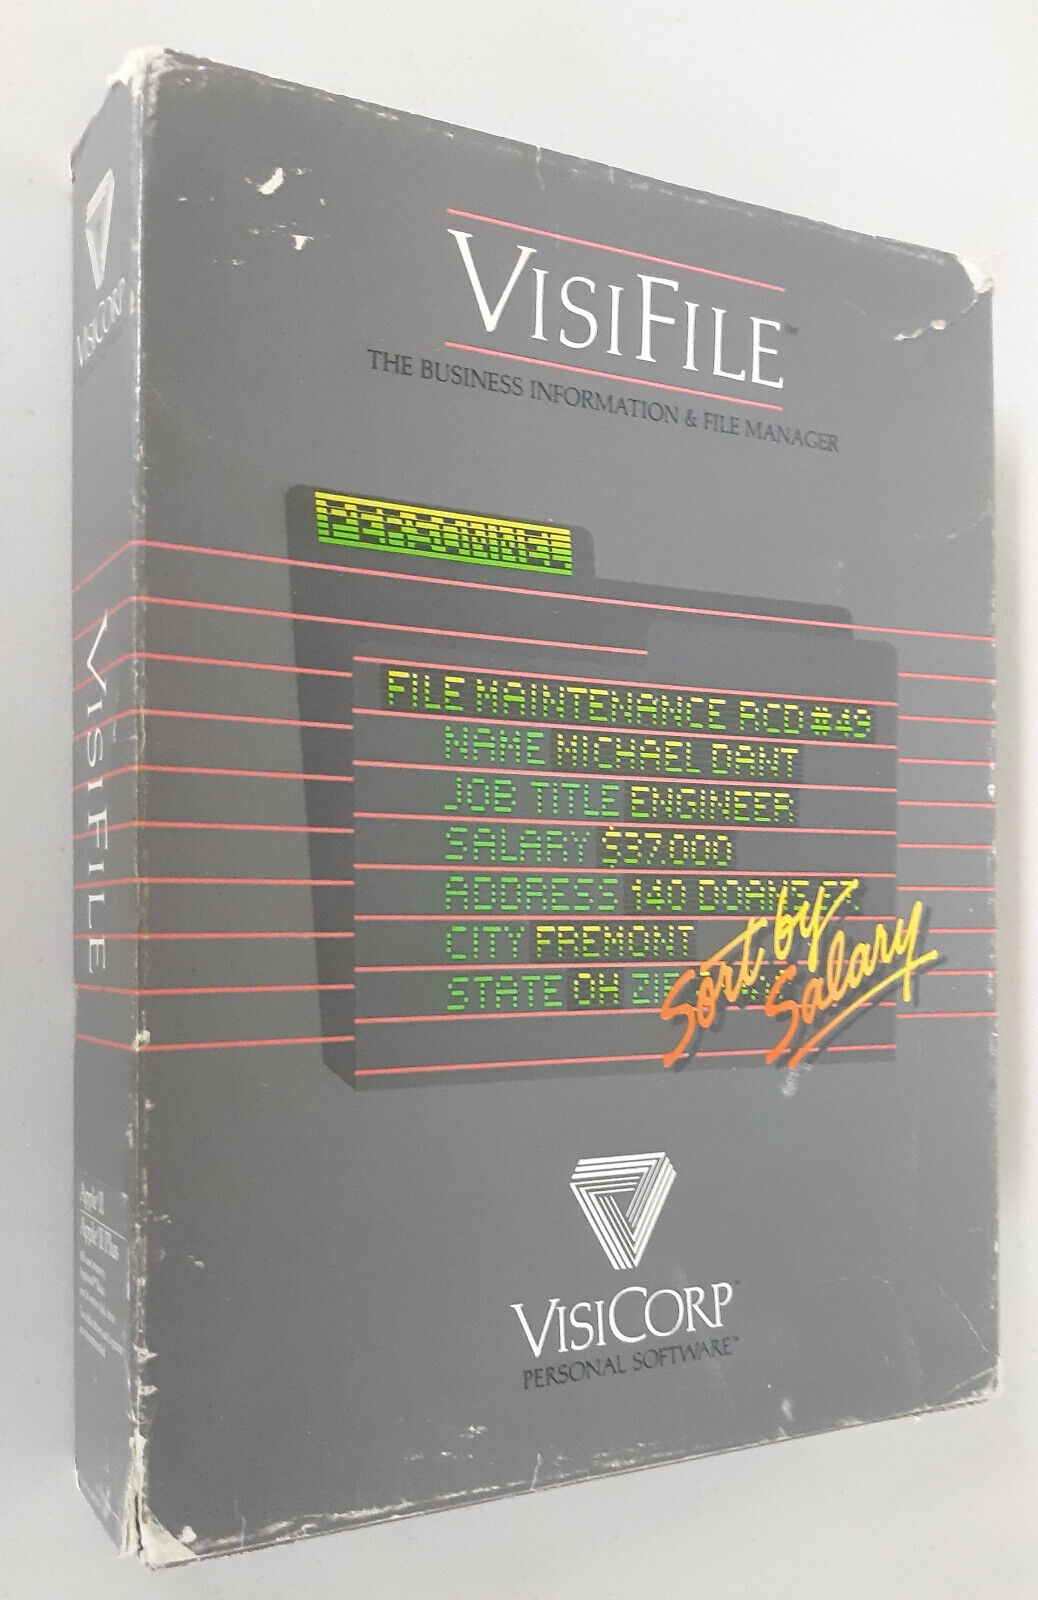 VisiFile Information & File Manager by Visicorp for Apple II+,IIe,IIc,IIgs 1981